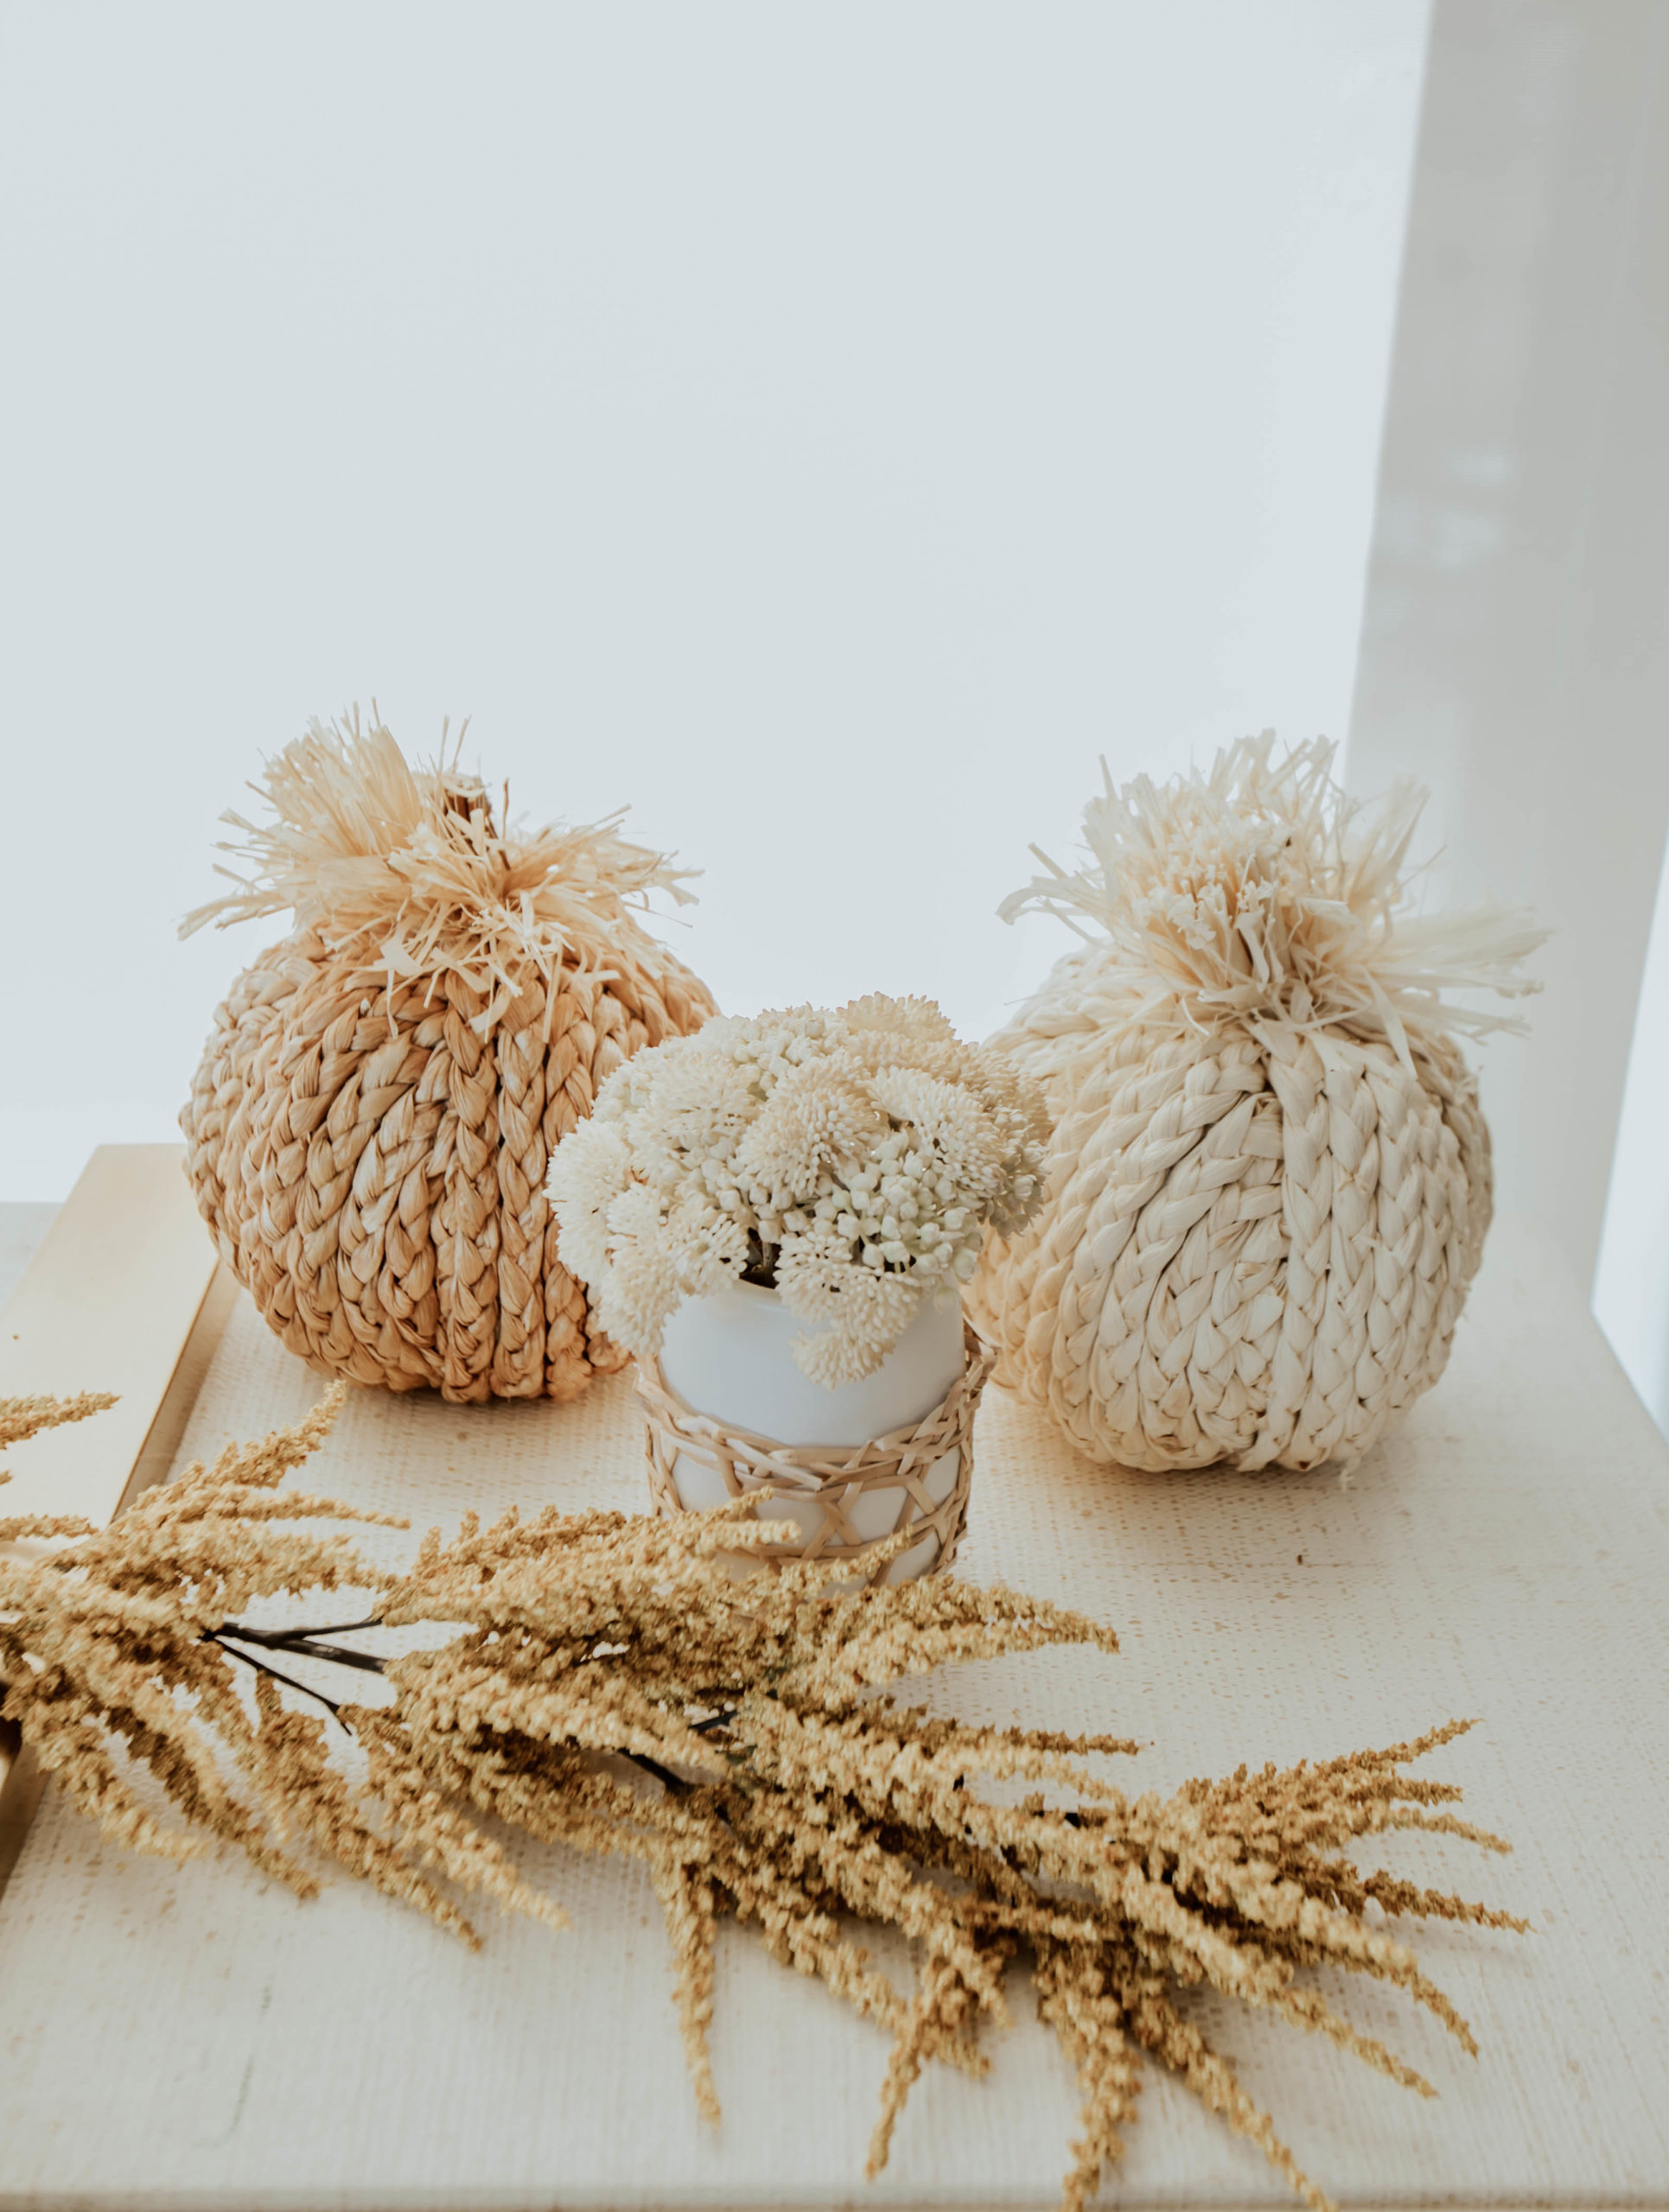 Reno bloggers Ashley Zeal Hurd and Emily Wieczorek share their favorite fall decor. They found great items at all price points!